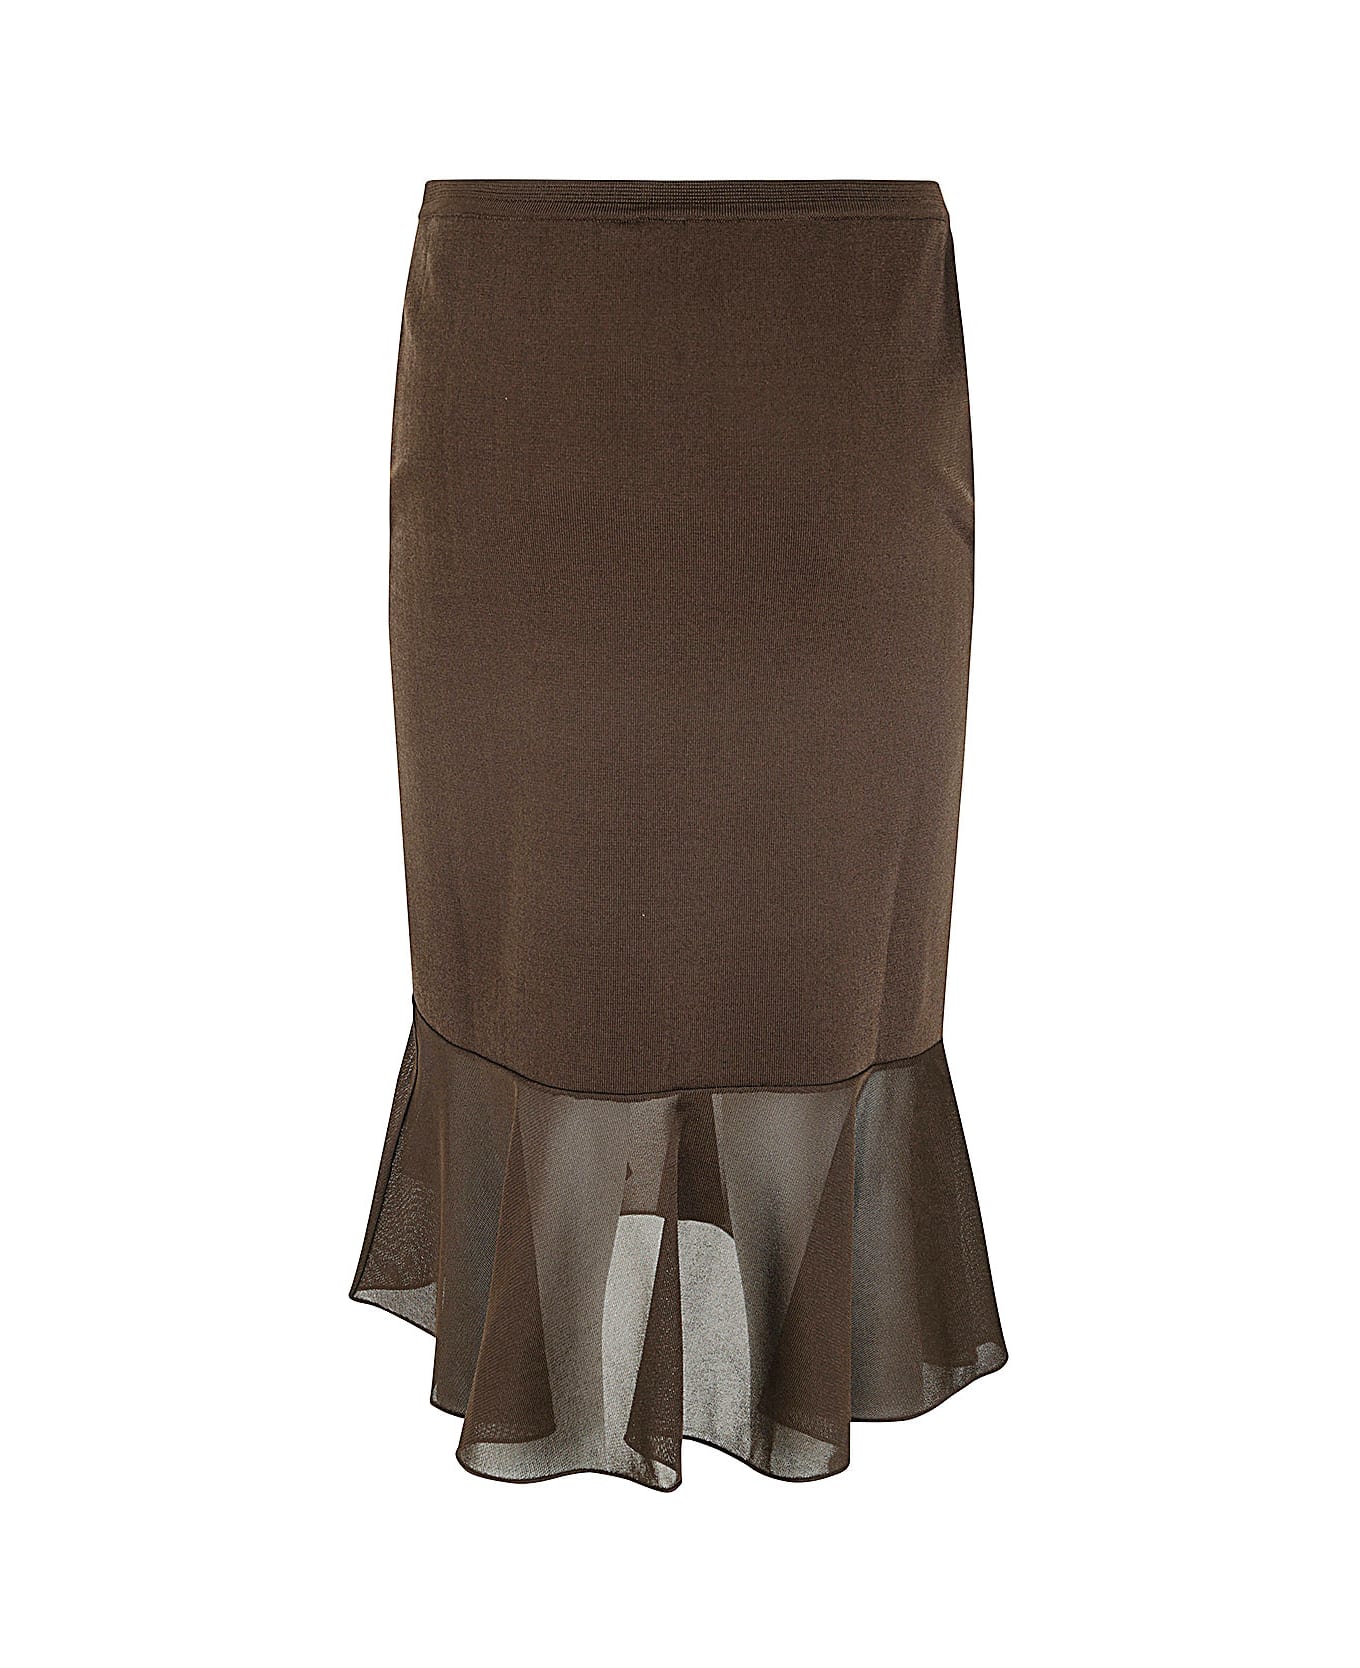 Tom Ford Knitted Skirt - Chocolate Brown スカート